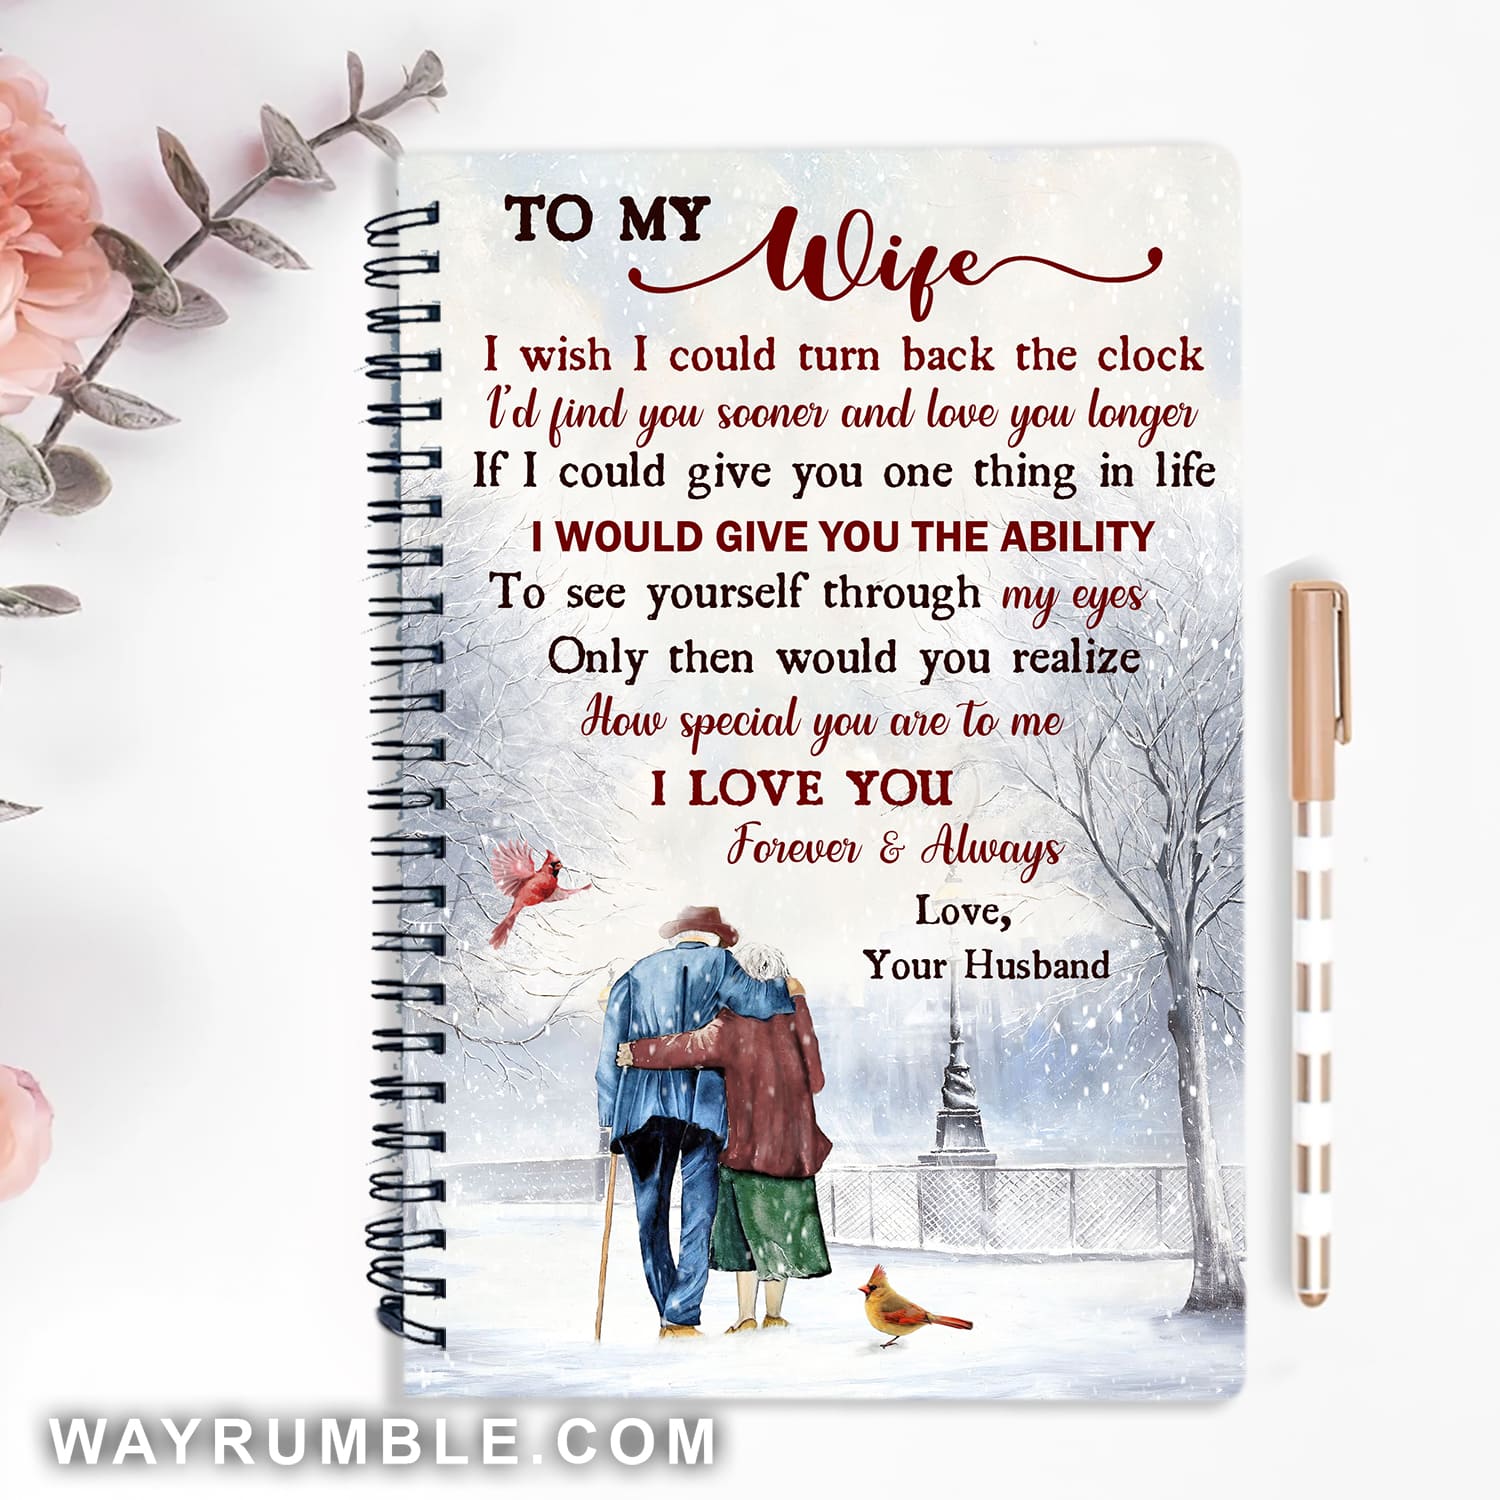 I wish I could turn back the clock - To my wife, Old couple, Cardinal Spiral Journal